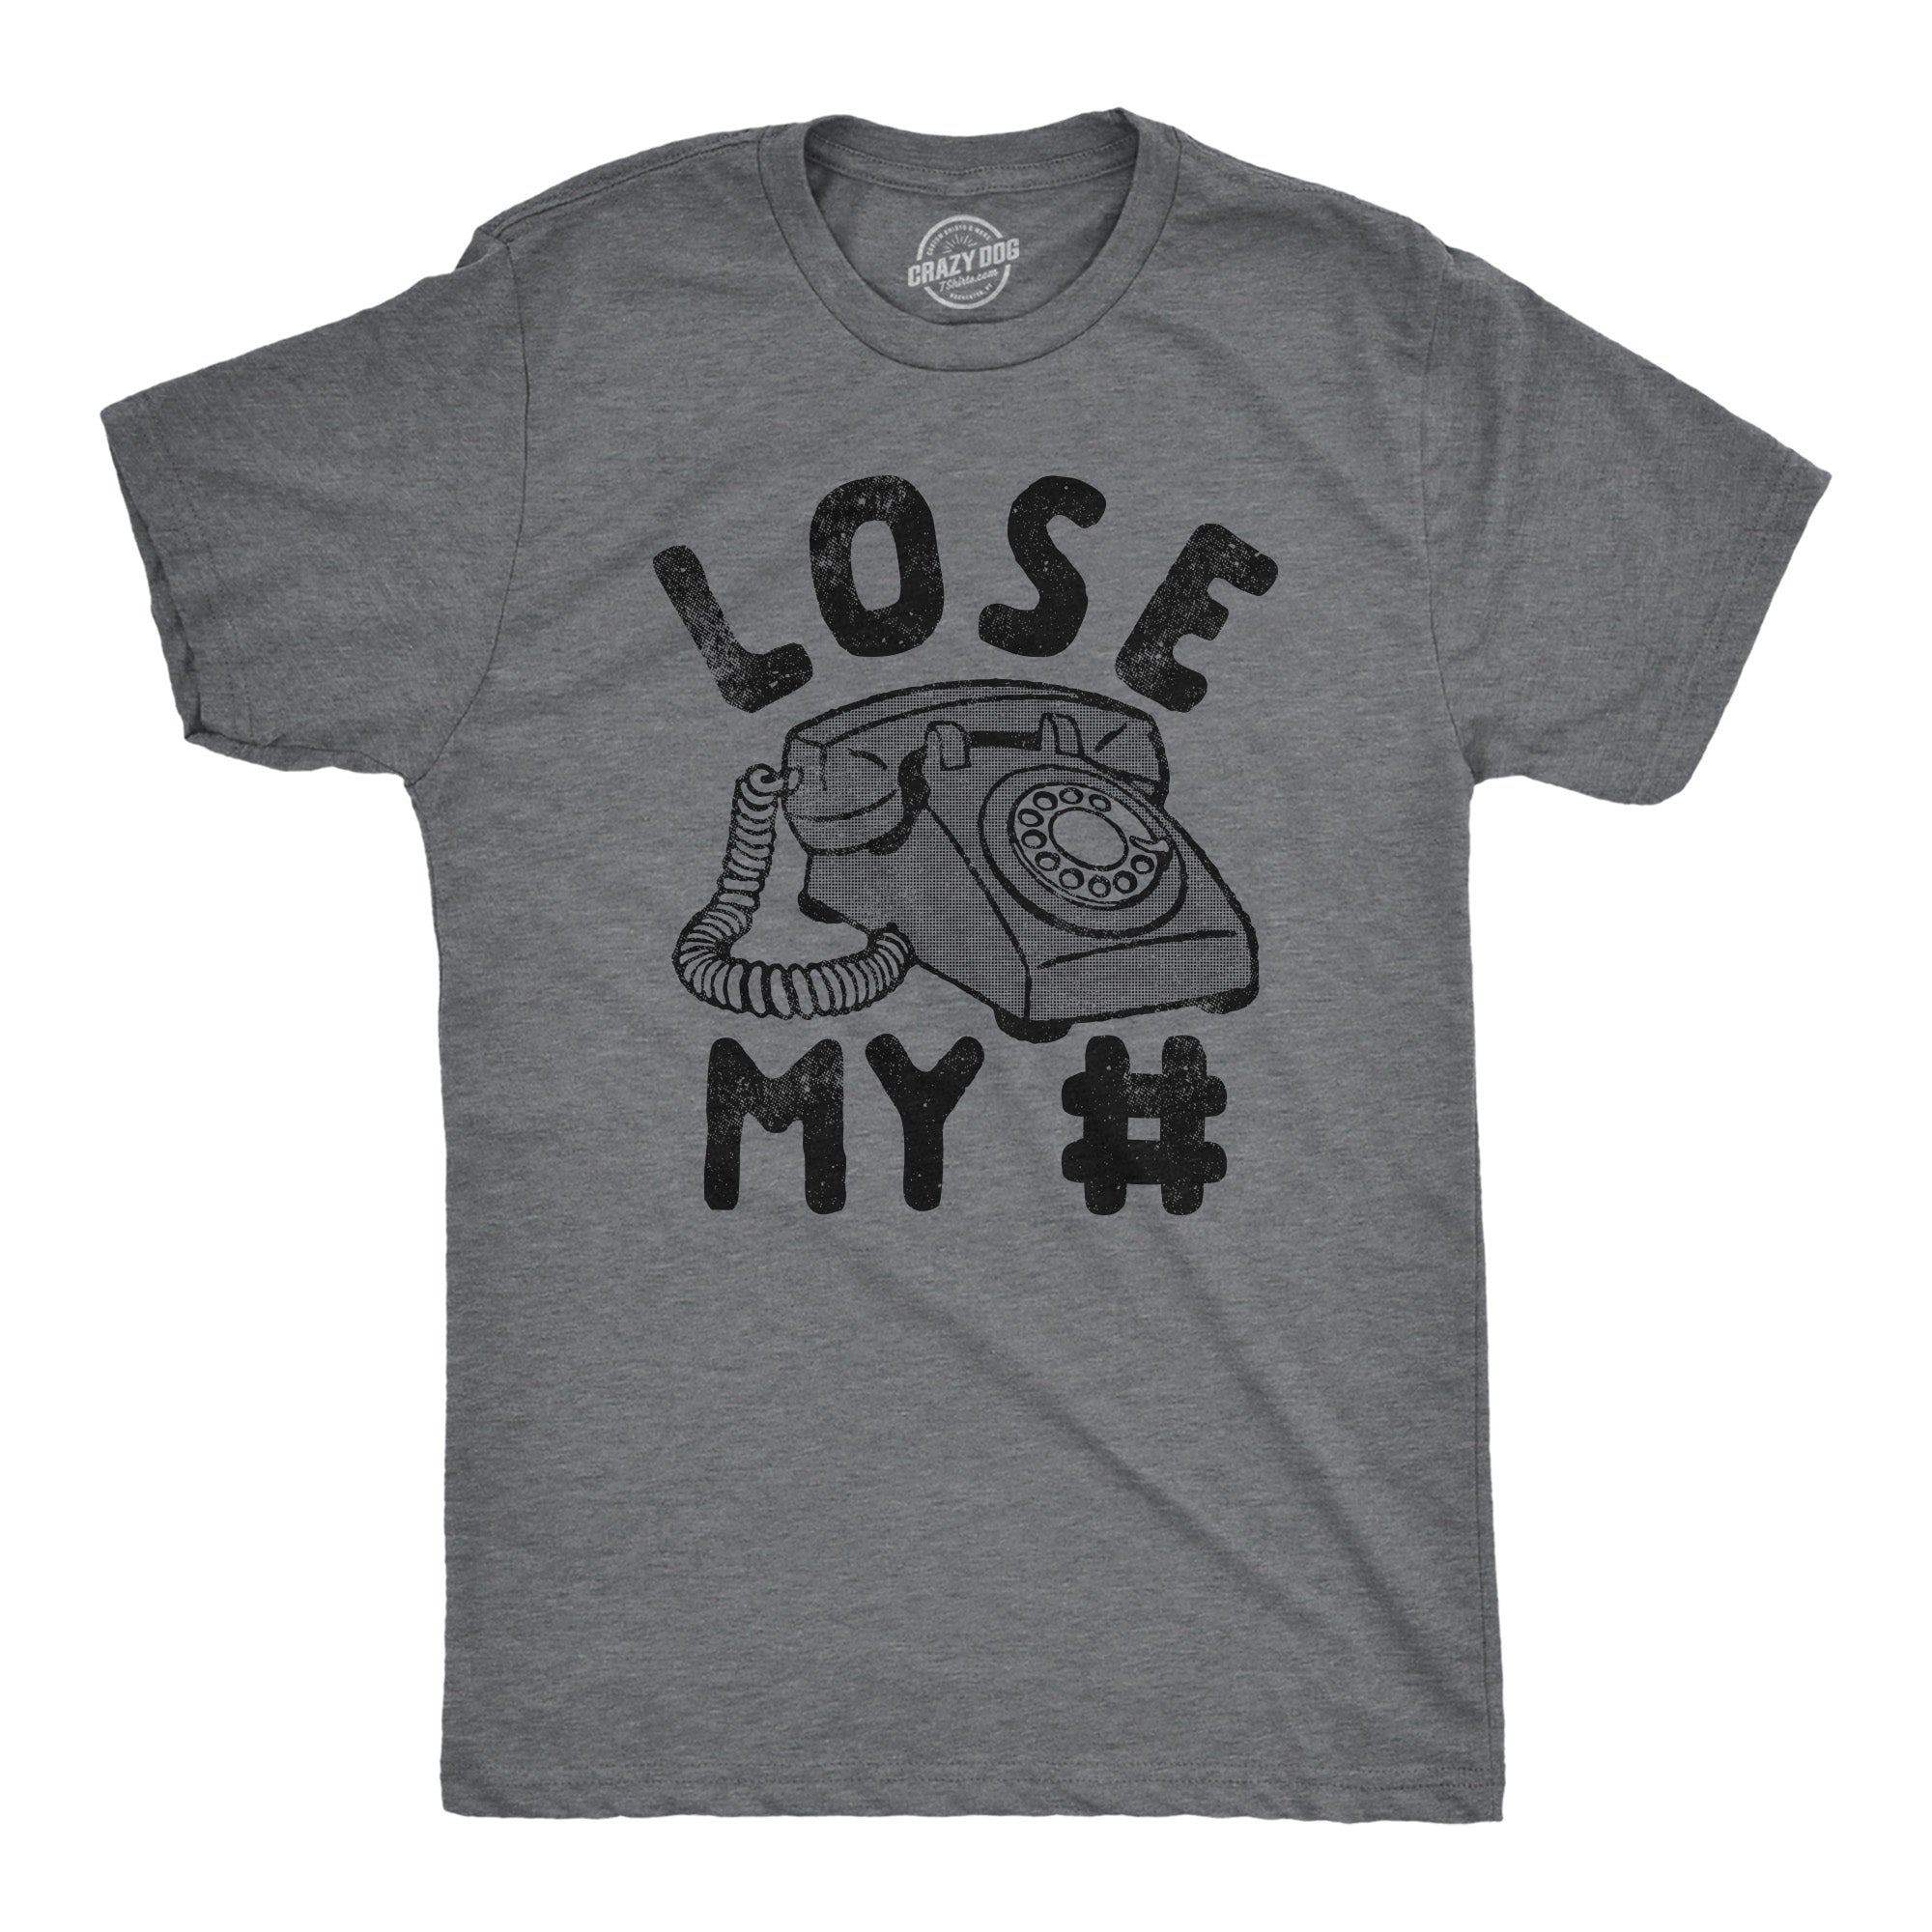 Funny Dark Heather Grey - Lose My Number Lose My Number Mens T Shirt Nerdy Sarcastic Tee